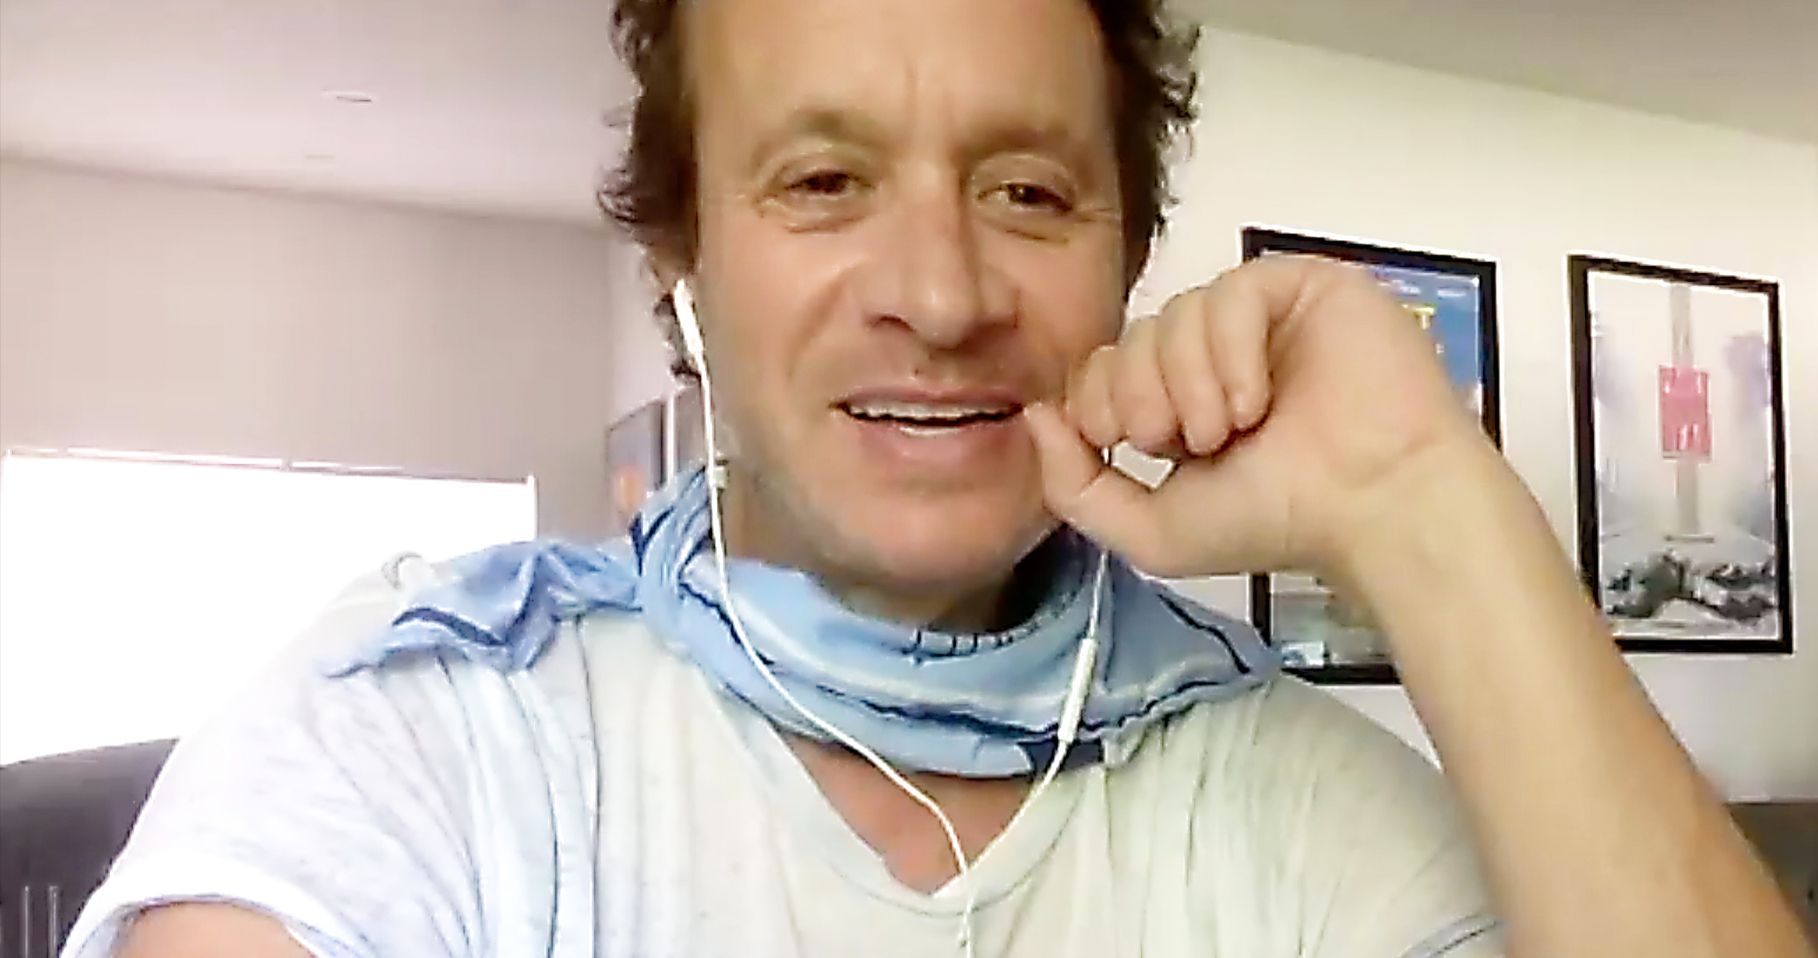 Pauly Shore Invites Us Into His Guest House for Some Big Laughs [Exclusive]